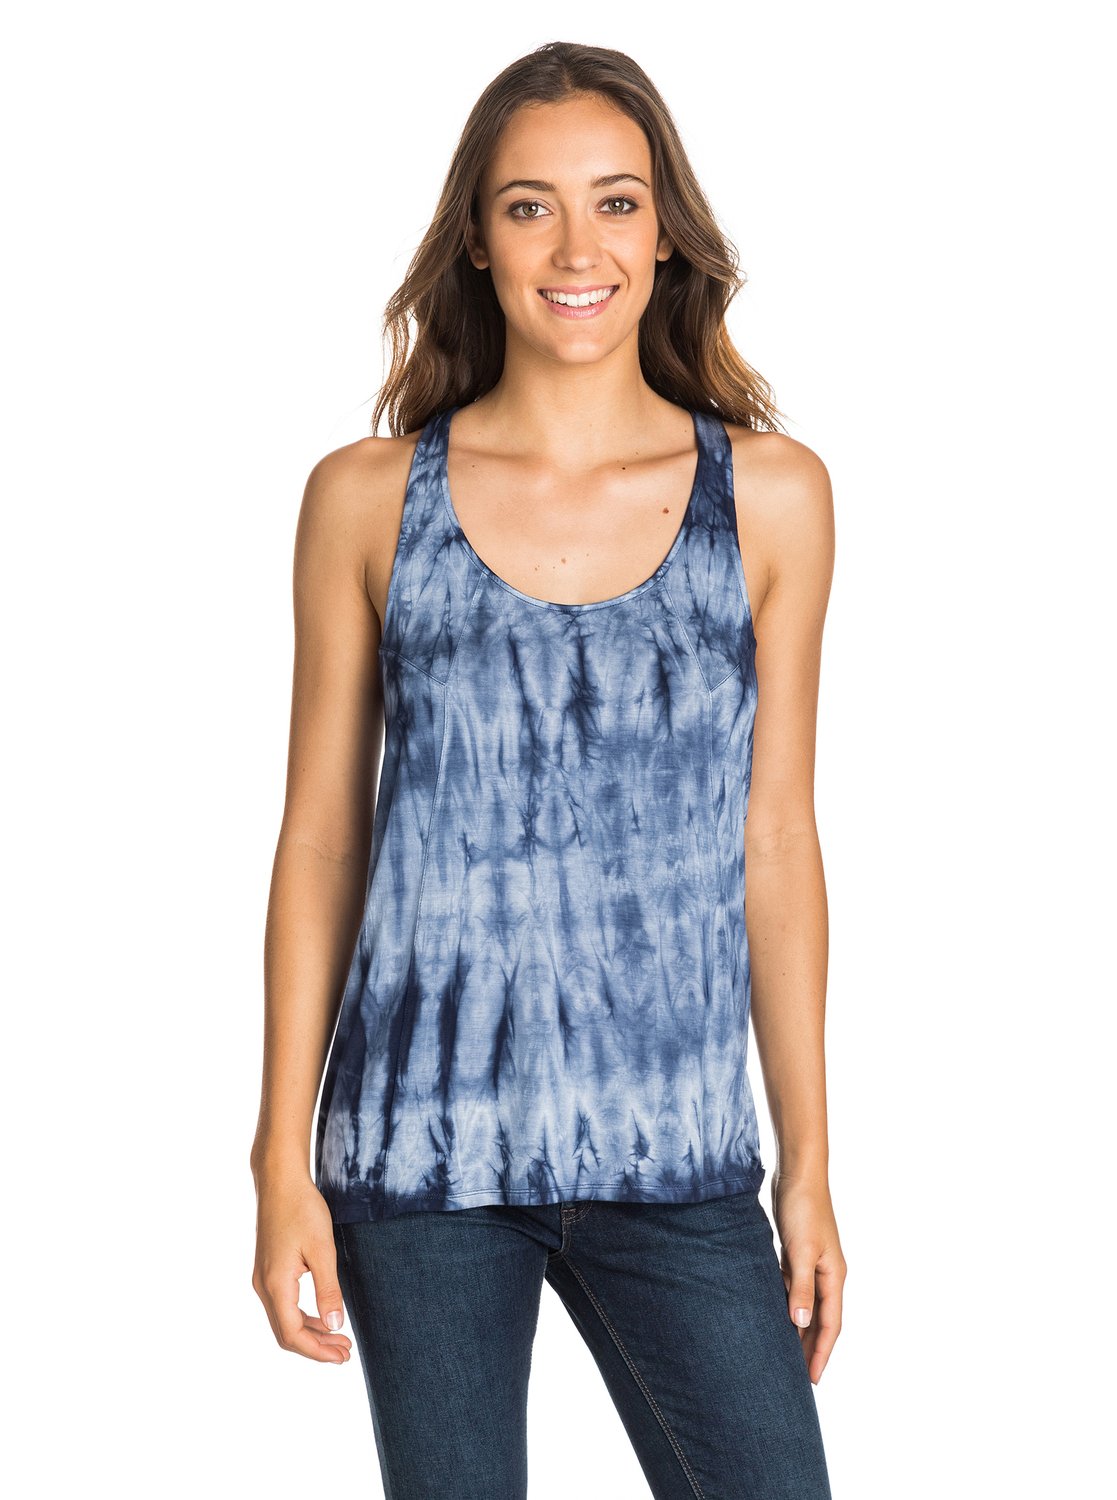 Fall For You Tank Top 888256157460 | Roxy